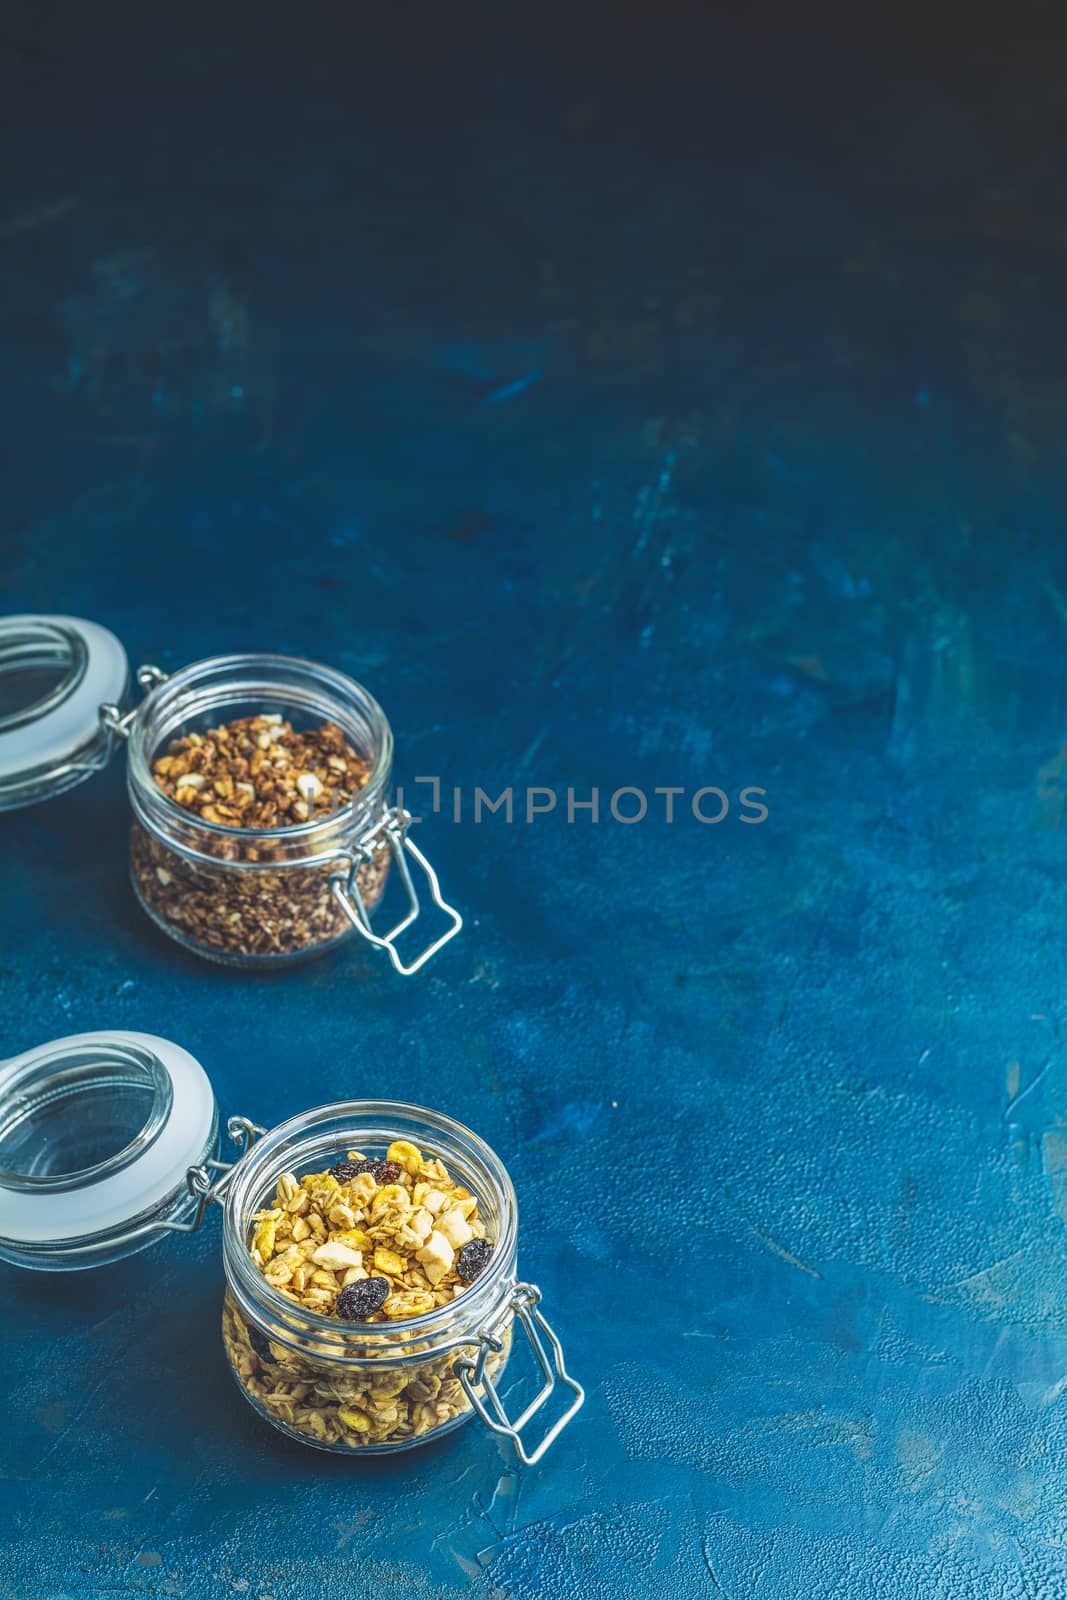 Two open glass jars of organic granola with berries, coconut chips and seeds on a dark blue concrete table surface.